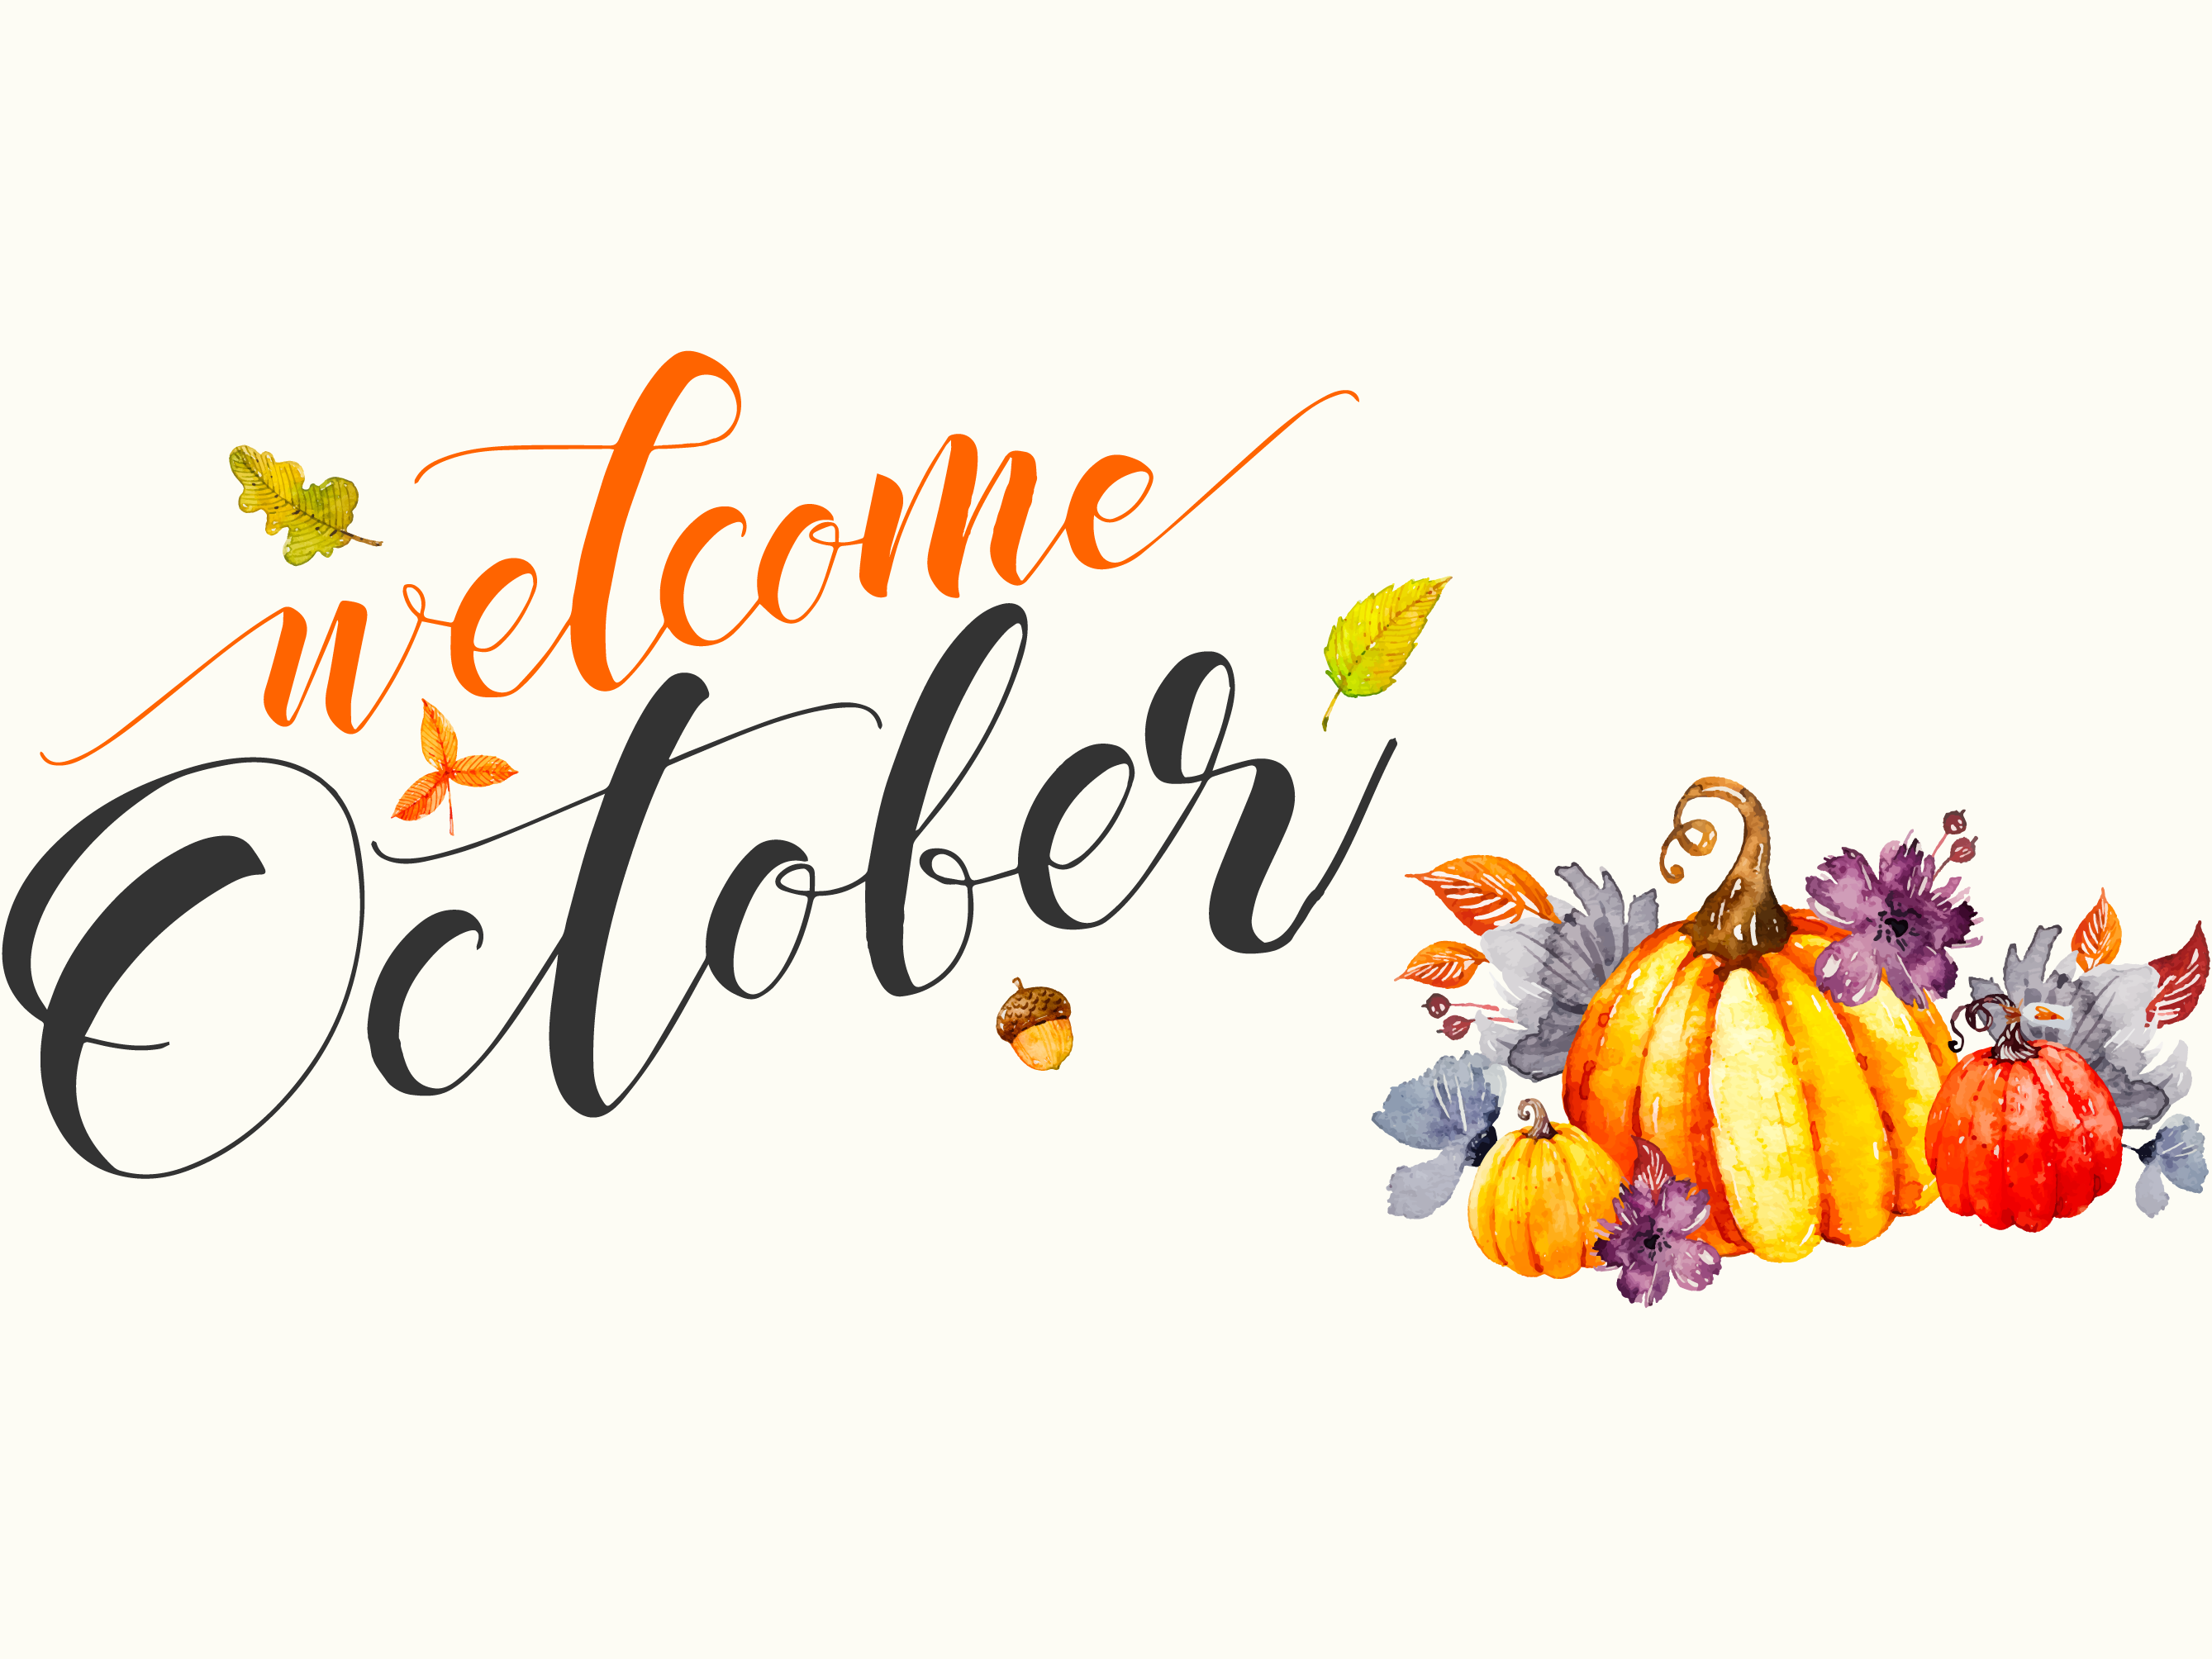 welcome-october-by-cromatix-creative-image-lab-on-dribbble